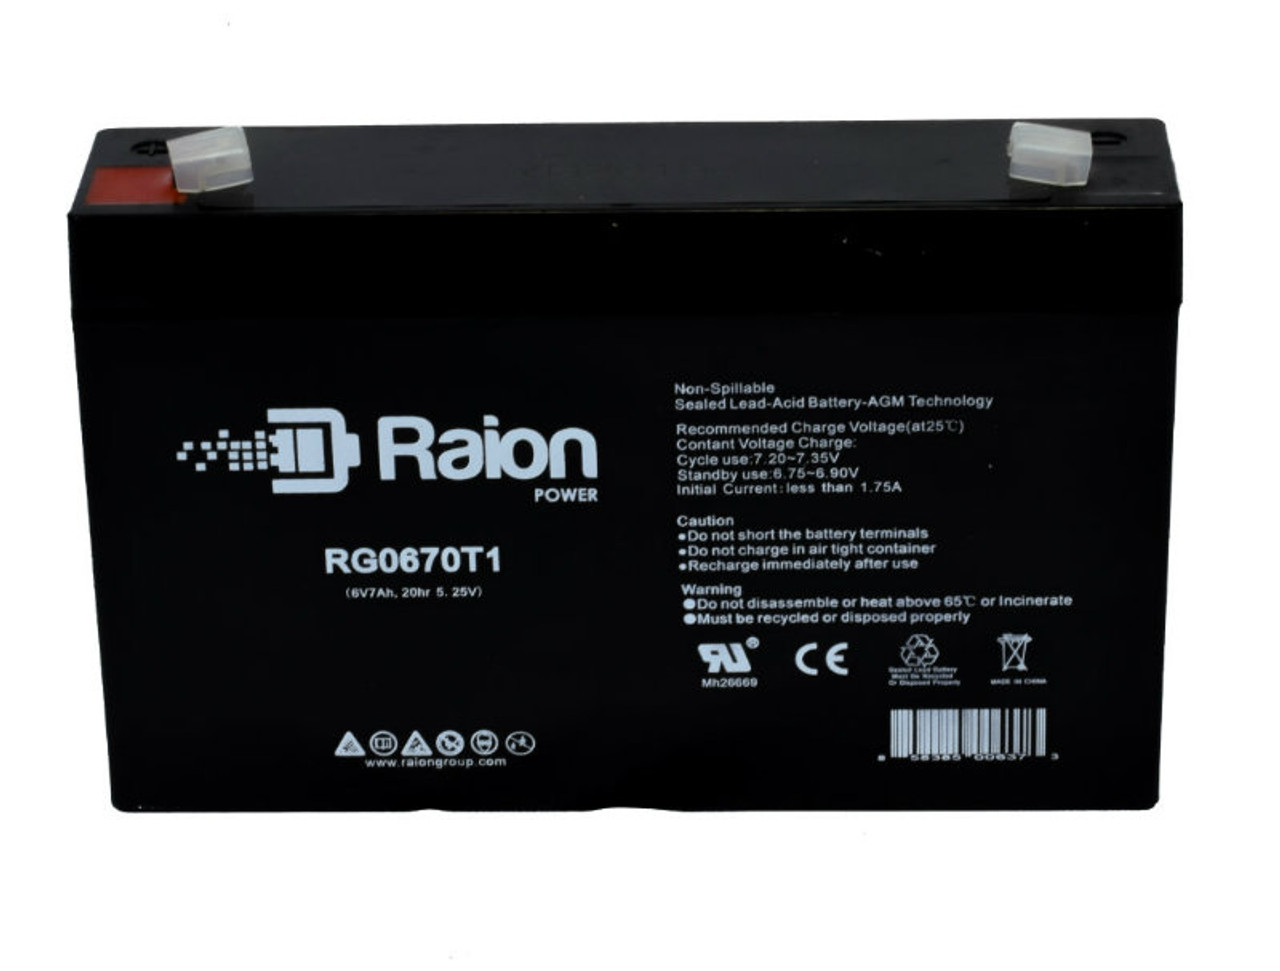 Raion Power RG0670T1 Replacement Battery Cartridge for Carpenter Watchman CL0001